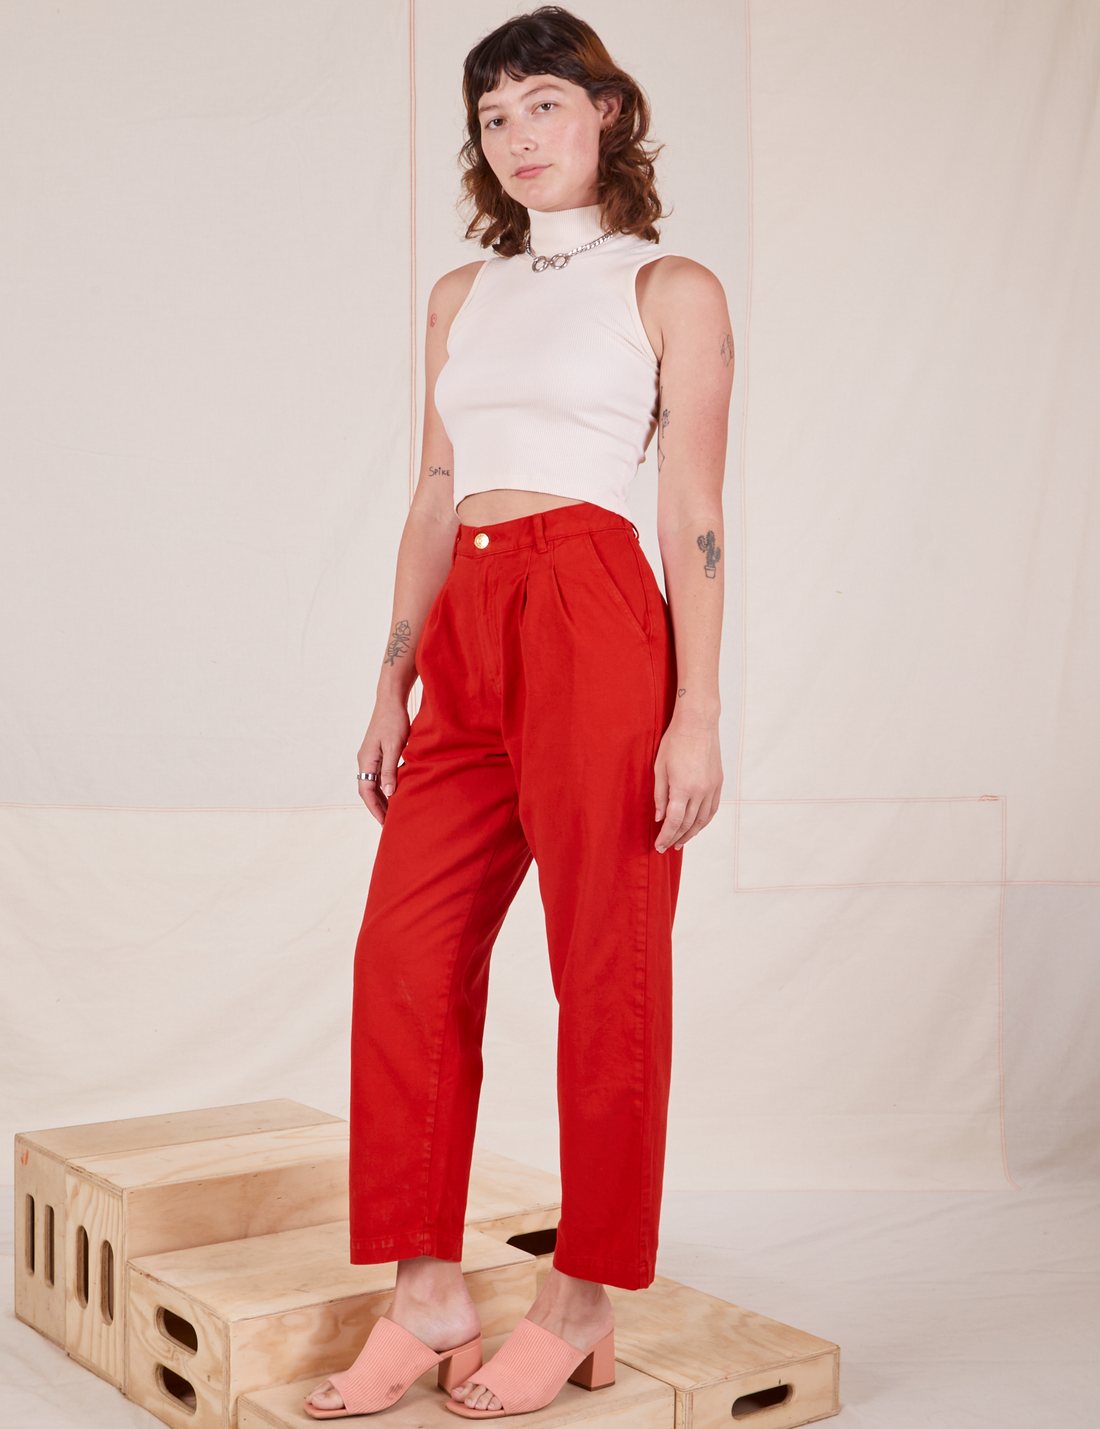 Alex is 5'8" and wearing XXS Heavyweight Trousers in Mustang Red paired with vintage off-white Sleeveless Turtleneck